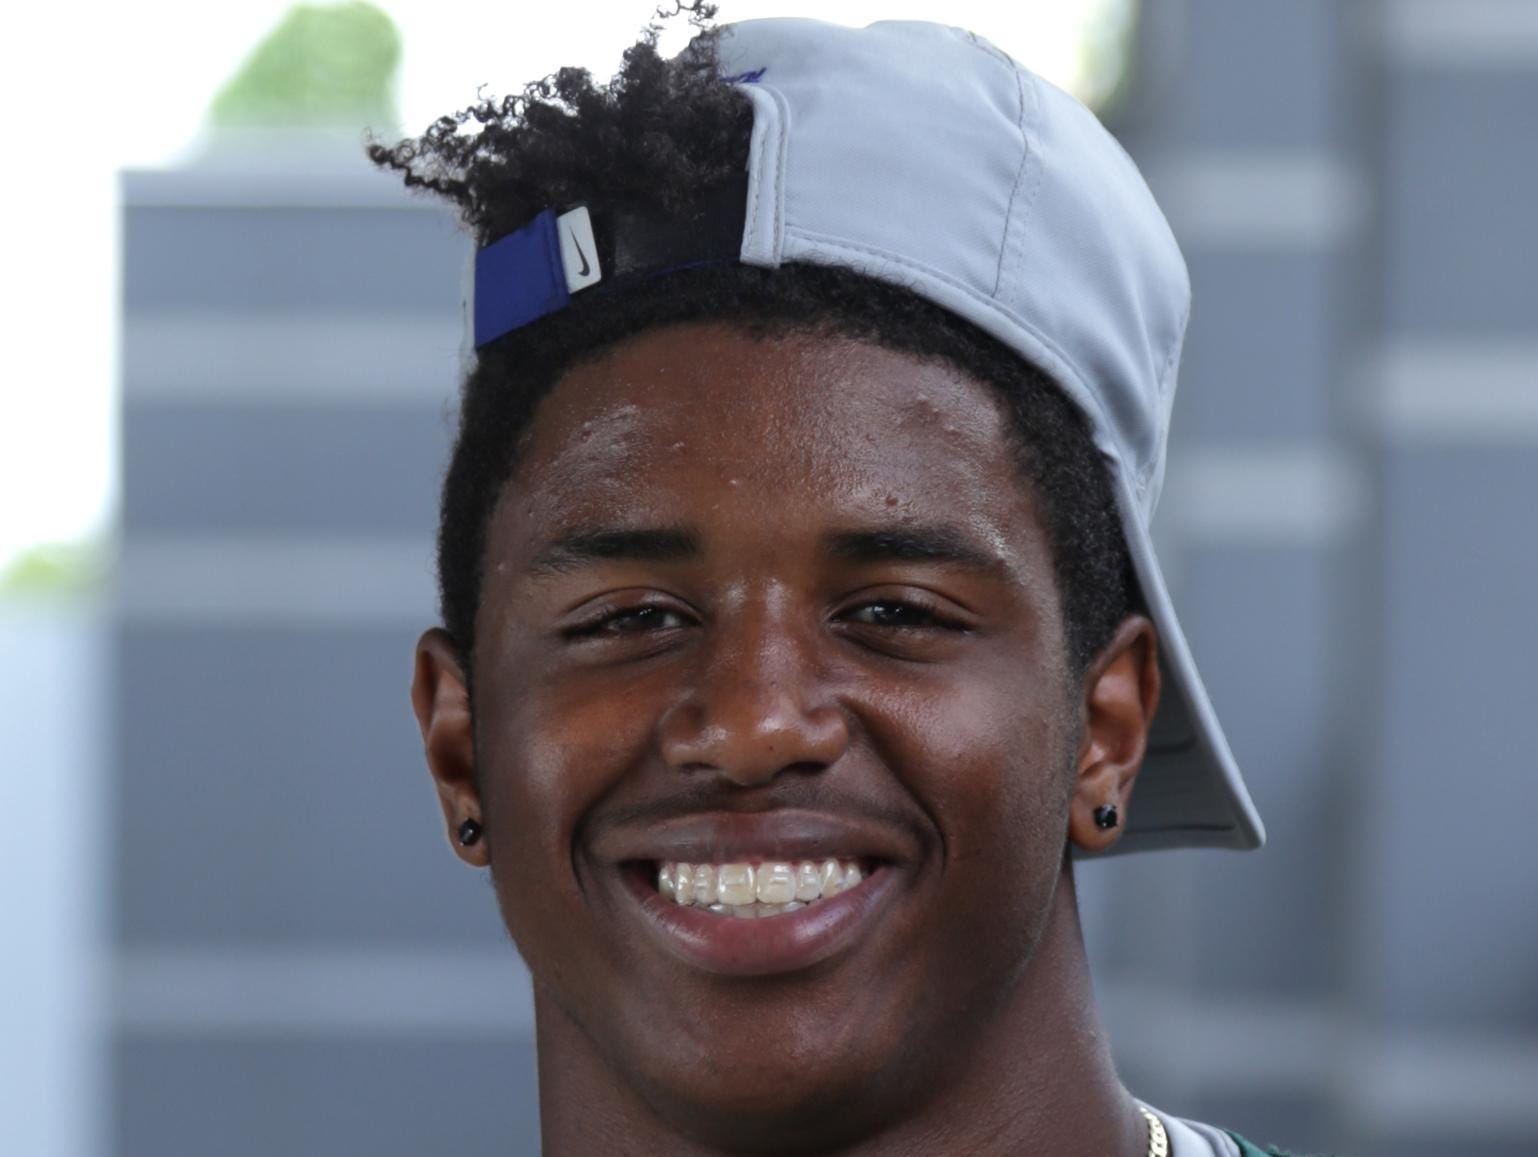 Detroit Cass Tech receiver Donovan Peoples-Jones poses for a photo during practice Wednesday Aug.17, 2016 at Cass Tech High School in Detroit.